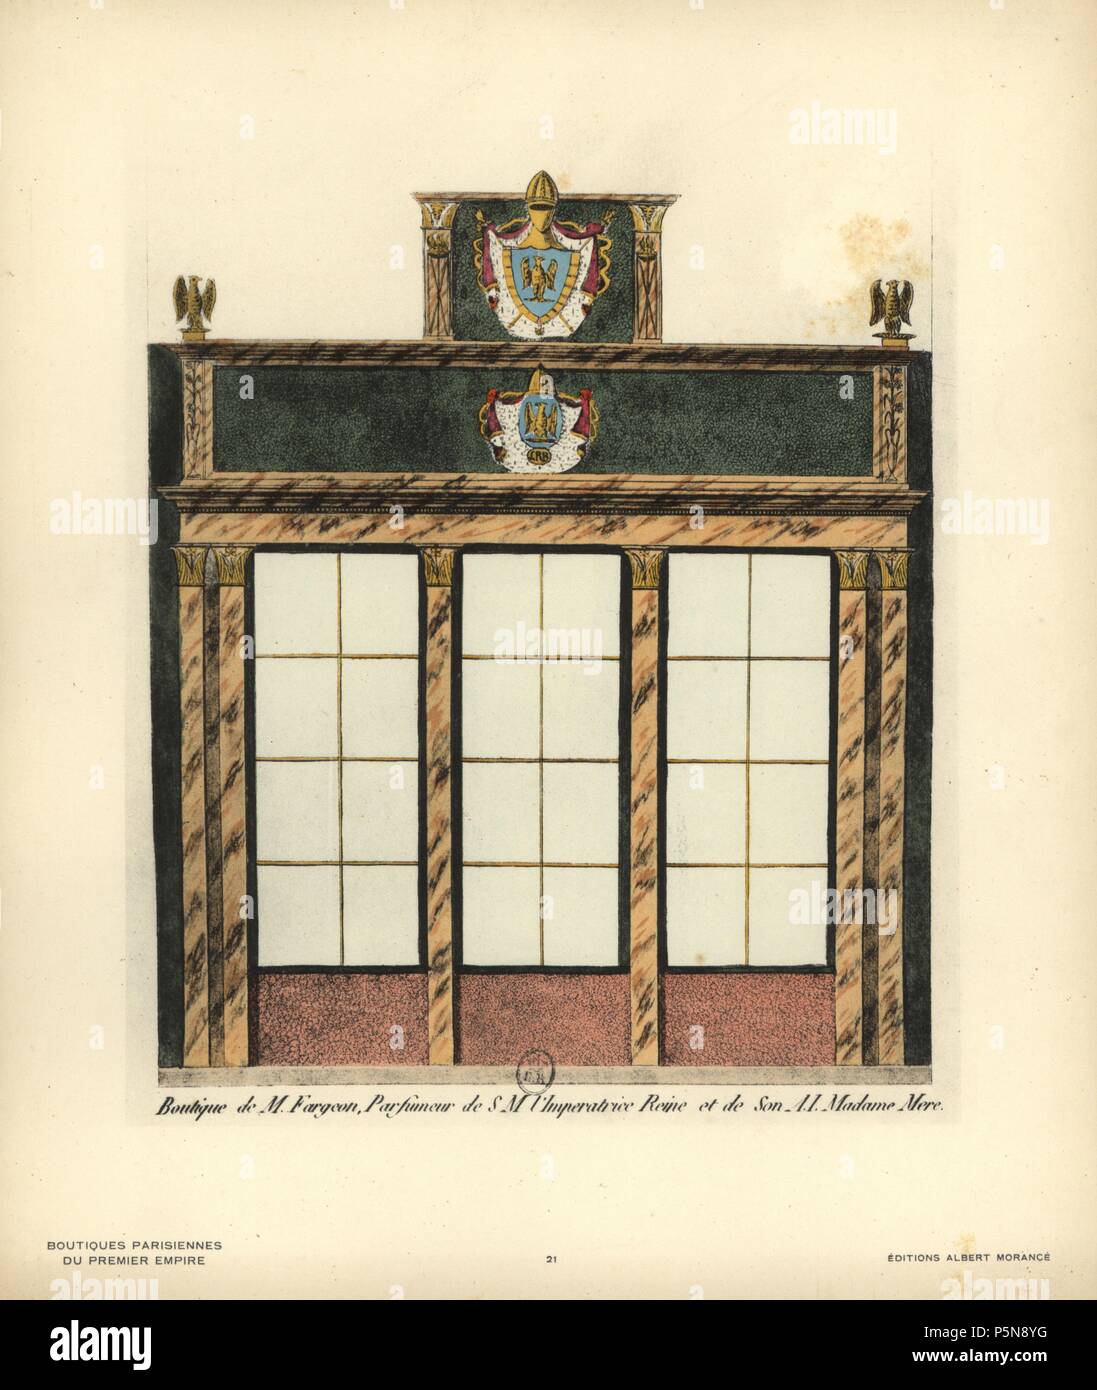 Shopfront of Monsieur Fargeon's perfumery to the Empress Josephine, Paris, circa 1800. Handcoloured lithograph from Hector-Martin Lefuel's "Boutiques Parisiennes du Premier Empire," (Parisian Stores of the First Empire), Paris, Albert Morance, 1925. The lithographs were reproduced from watercolors by the French architect Hector-Martin Lefuel (1810-1880), famous for his work on the completion of the Louvre and Fontainebleau. Stock Photo